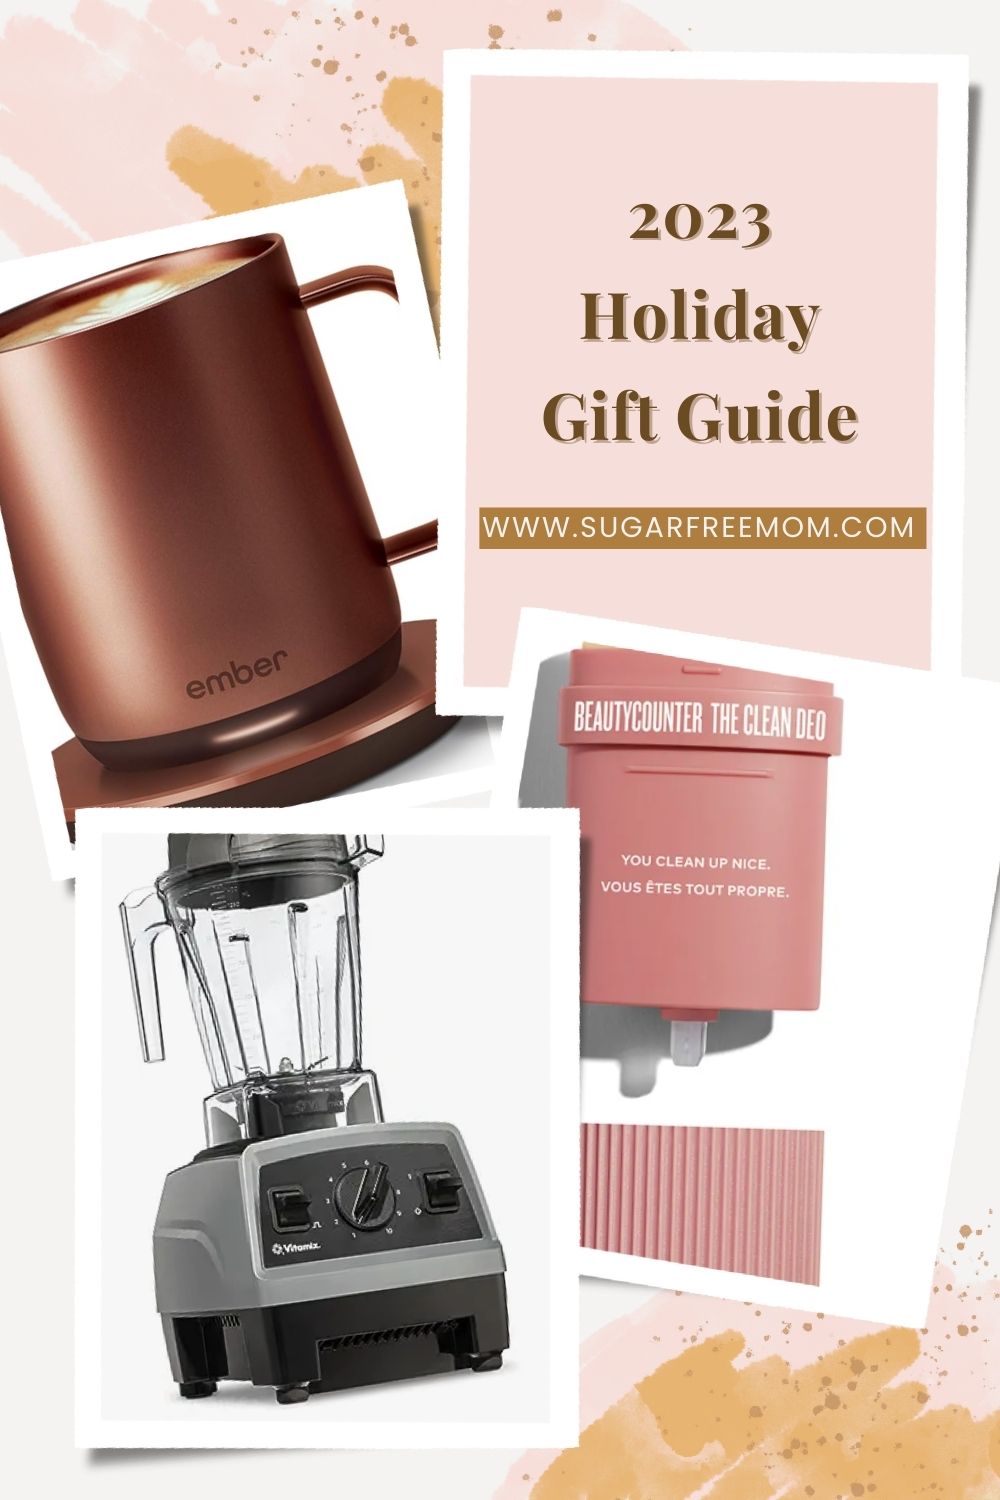 Best Gift Ideas 2023 - Holiday Gifts for Everyone